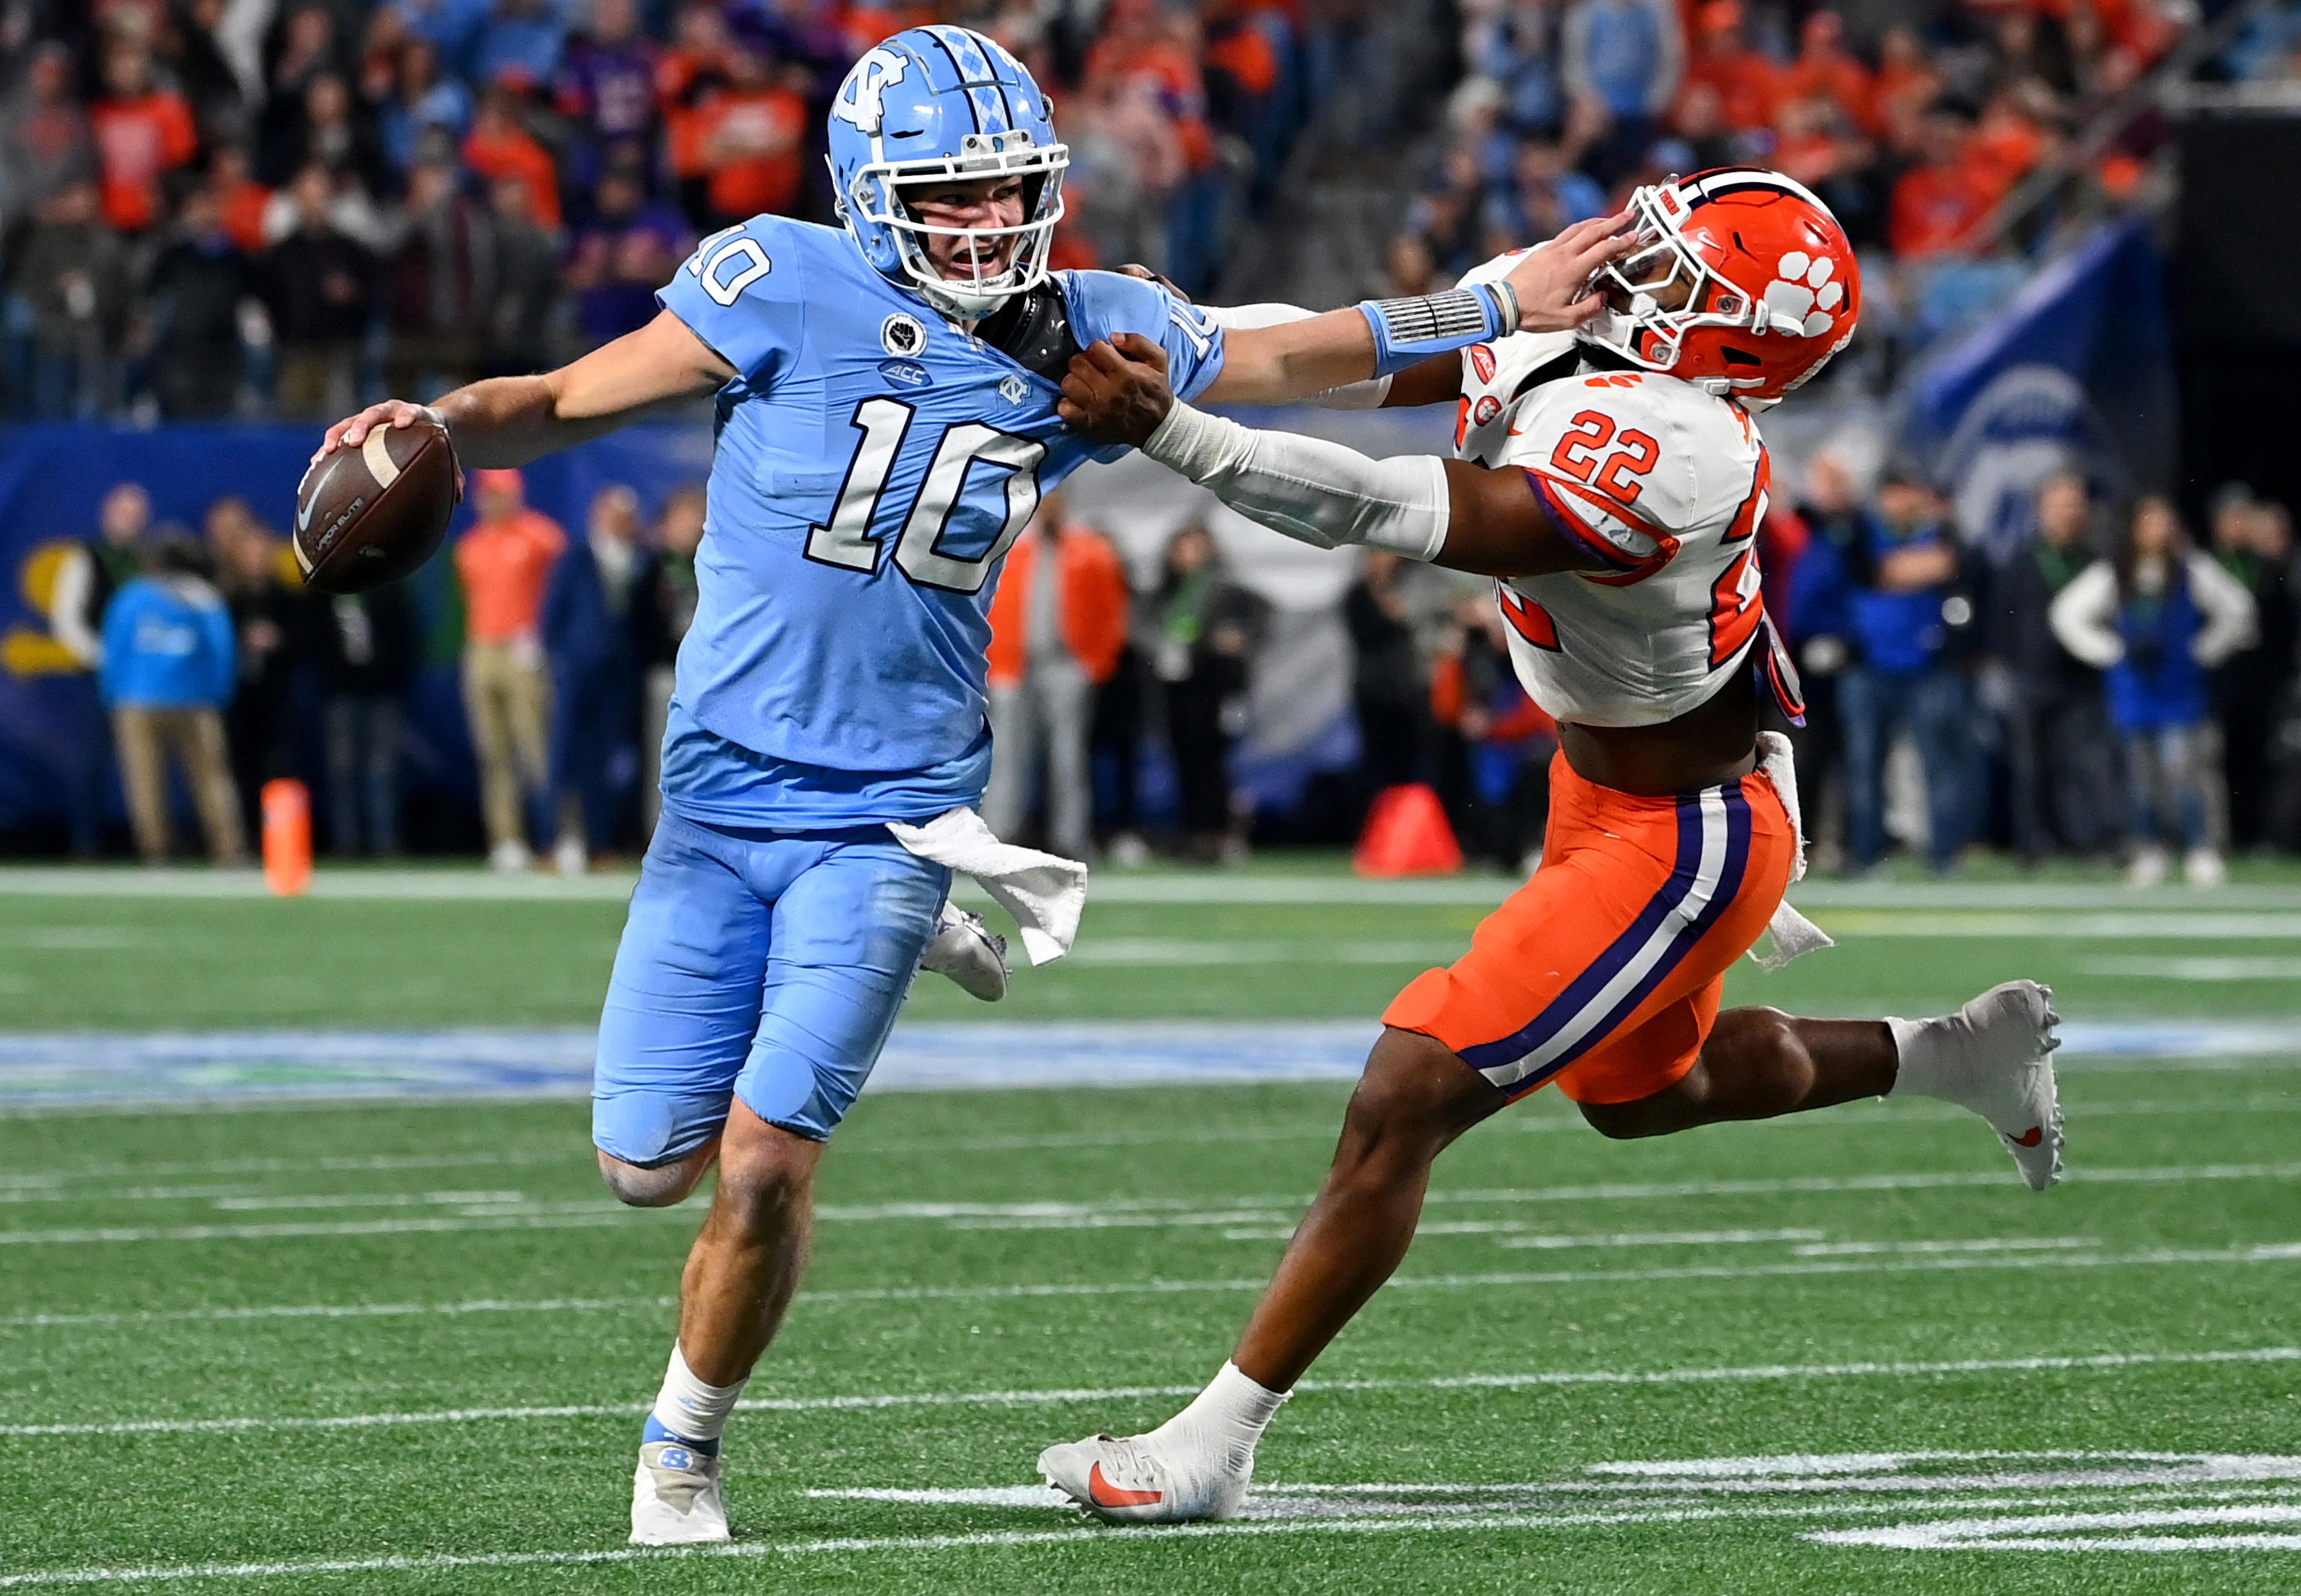 nfl draft boom-or-bust prospects: drake maye among 11 players offering high risk, reward